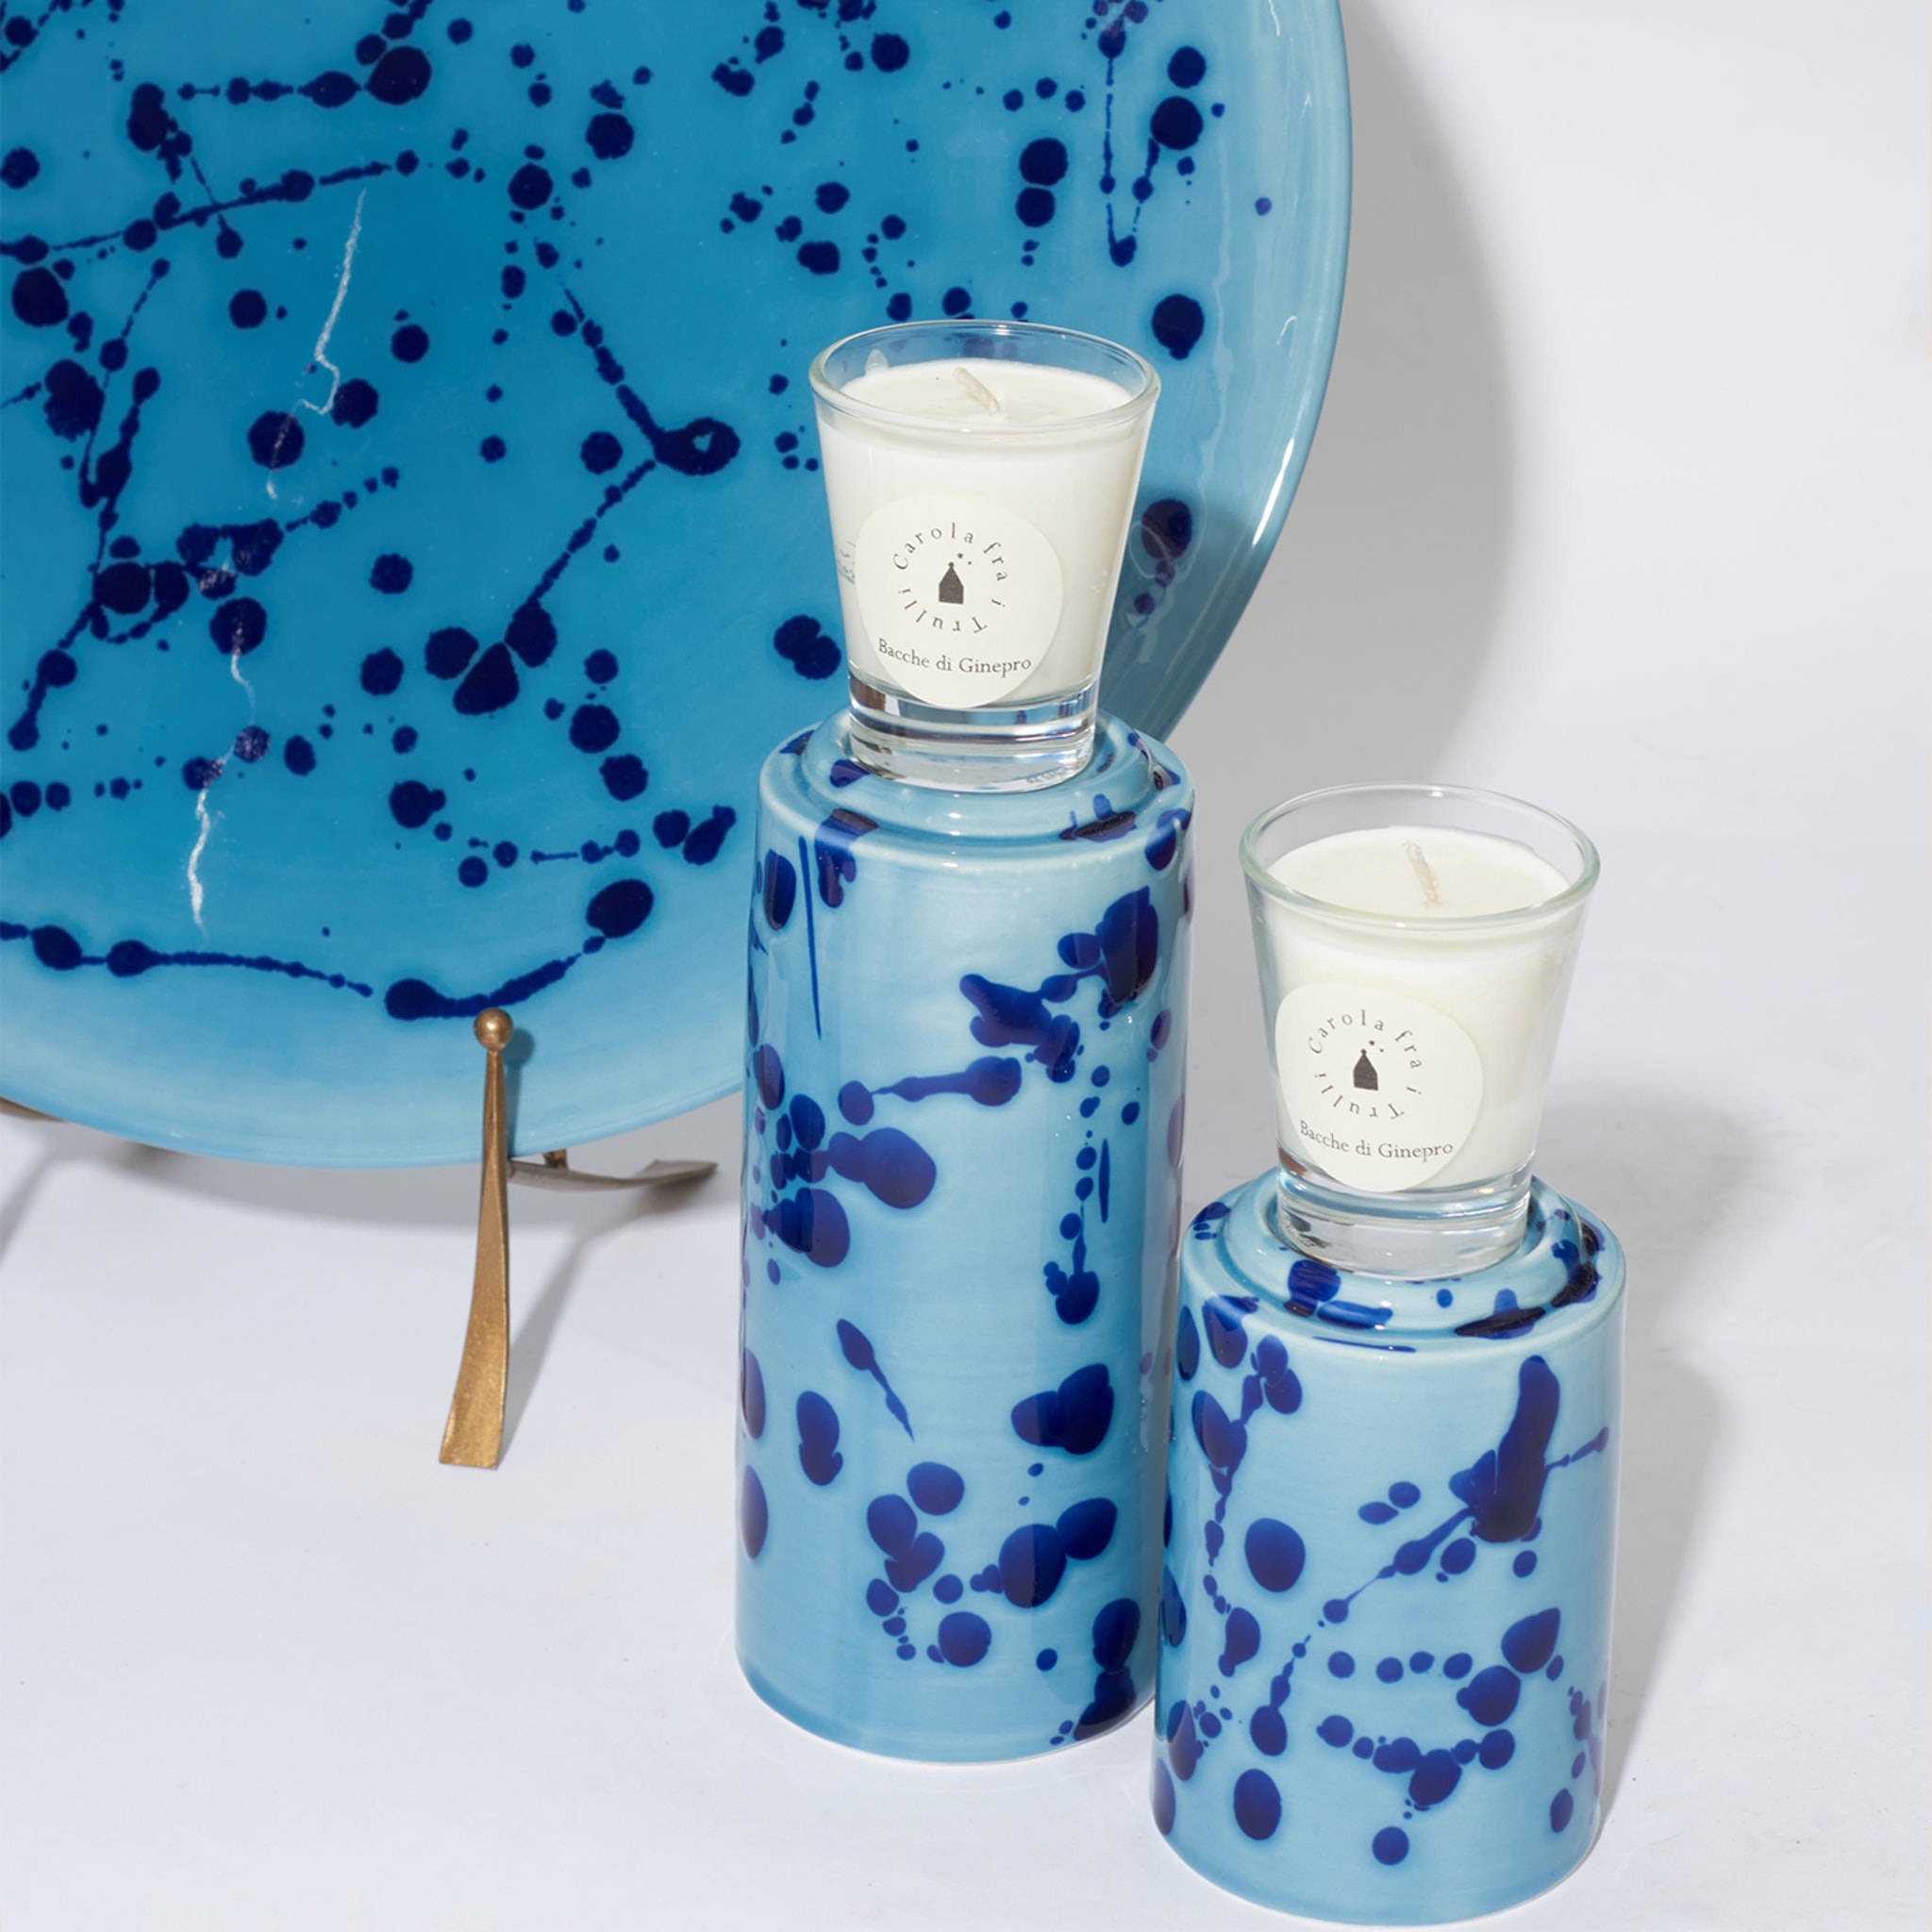 Celeste and Blue Totem with Scented Candle Fragrance Agrumeto  - Alternative view 1